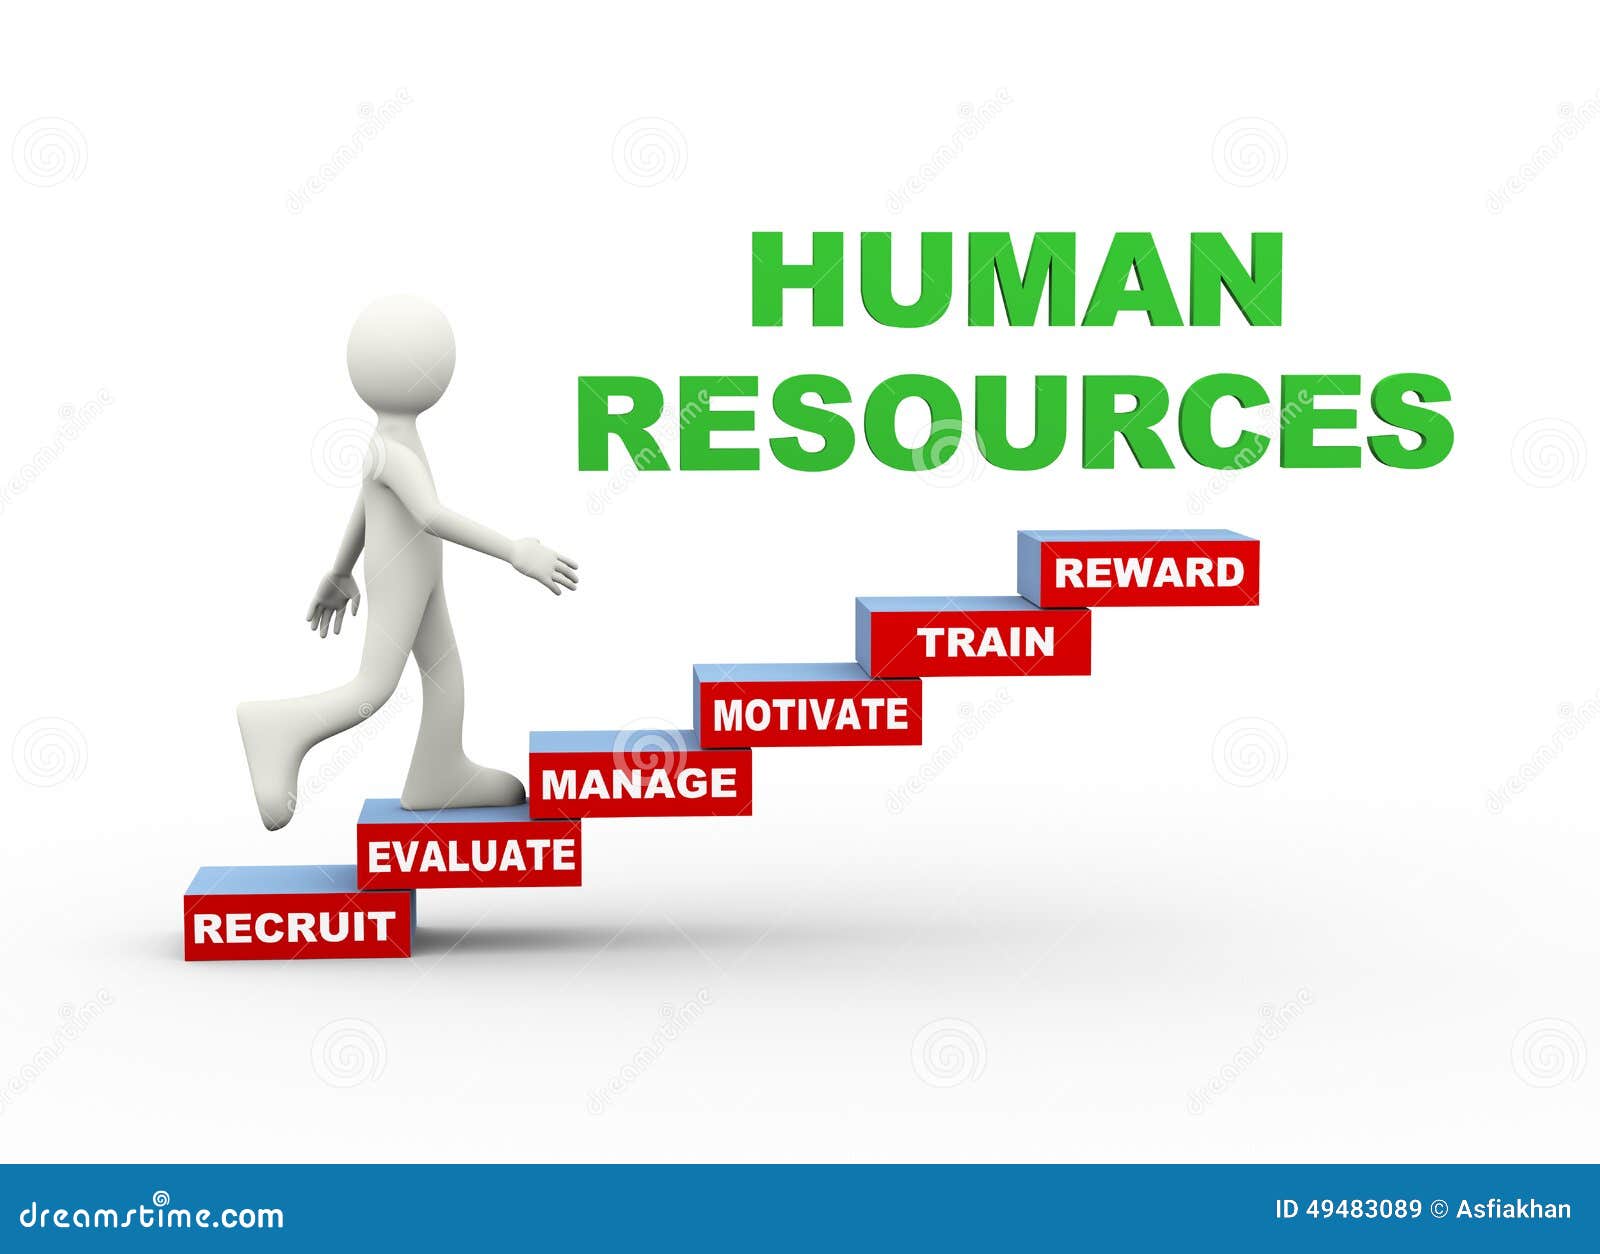 clipart of human resources - photo #49